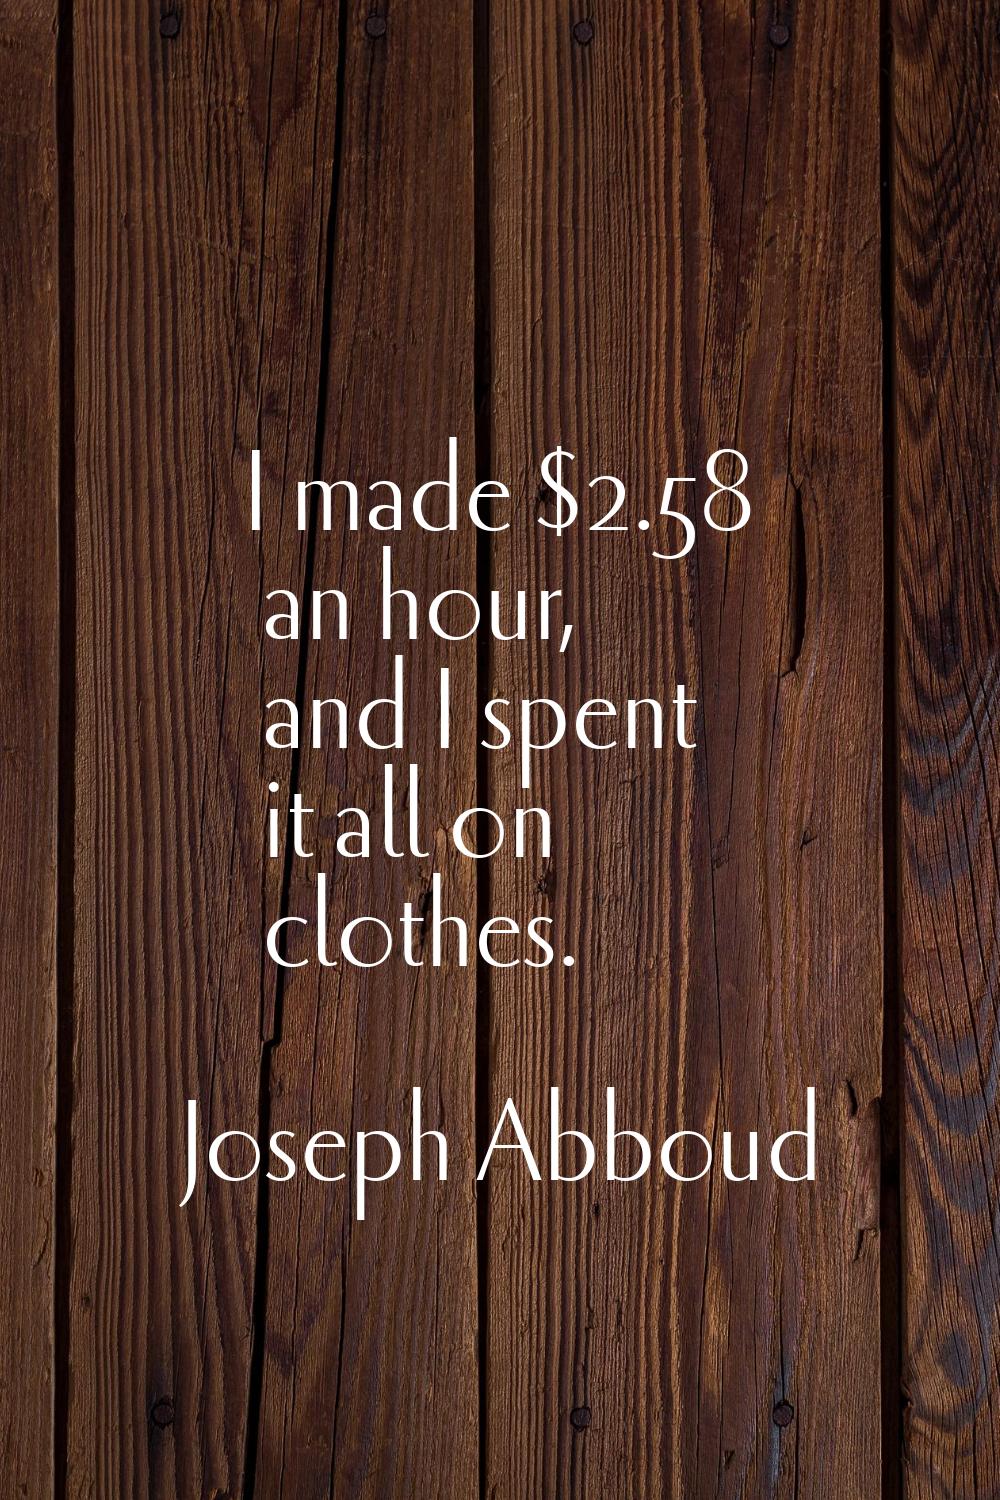 I made $2.58 an hour, and I spent it all on clothes.